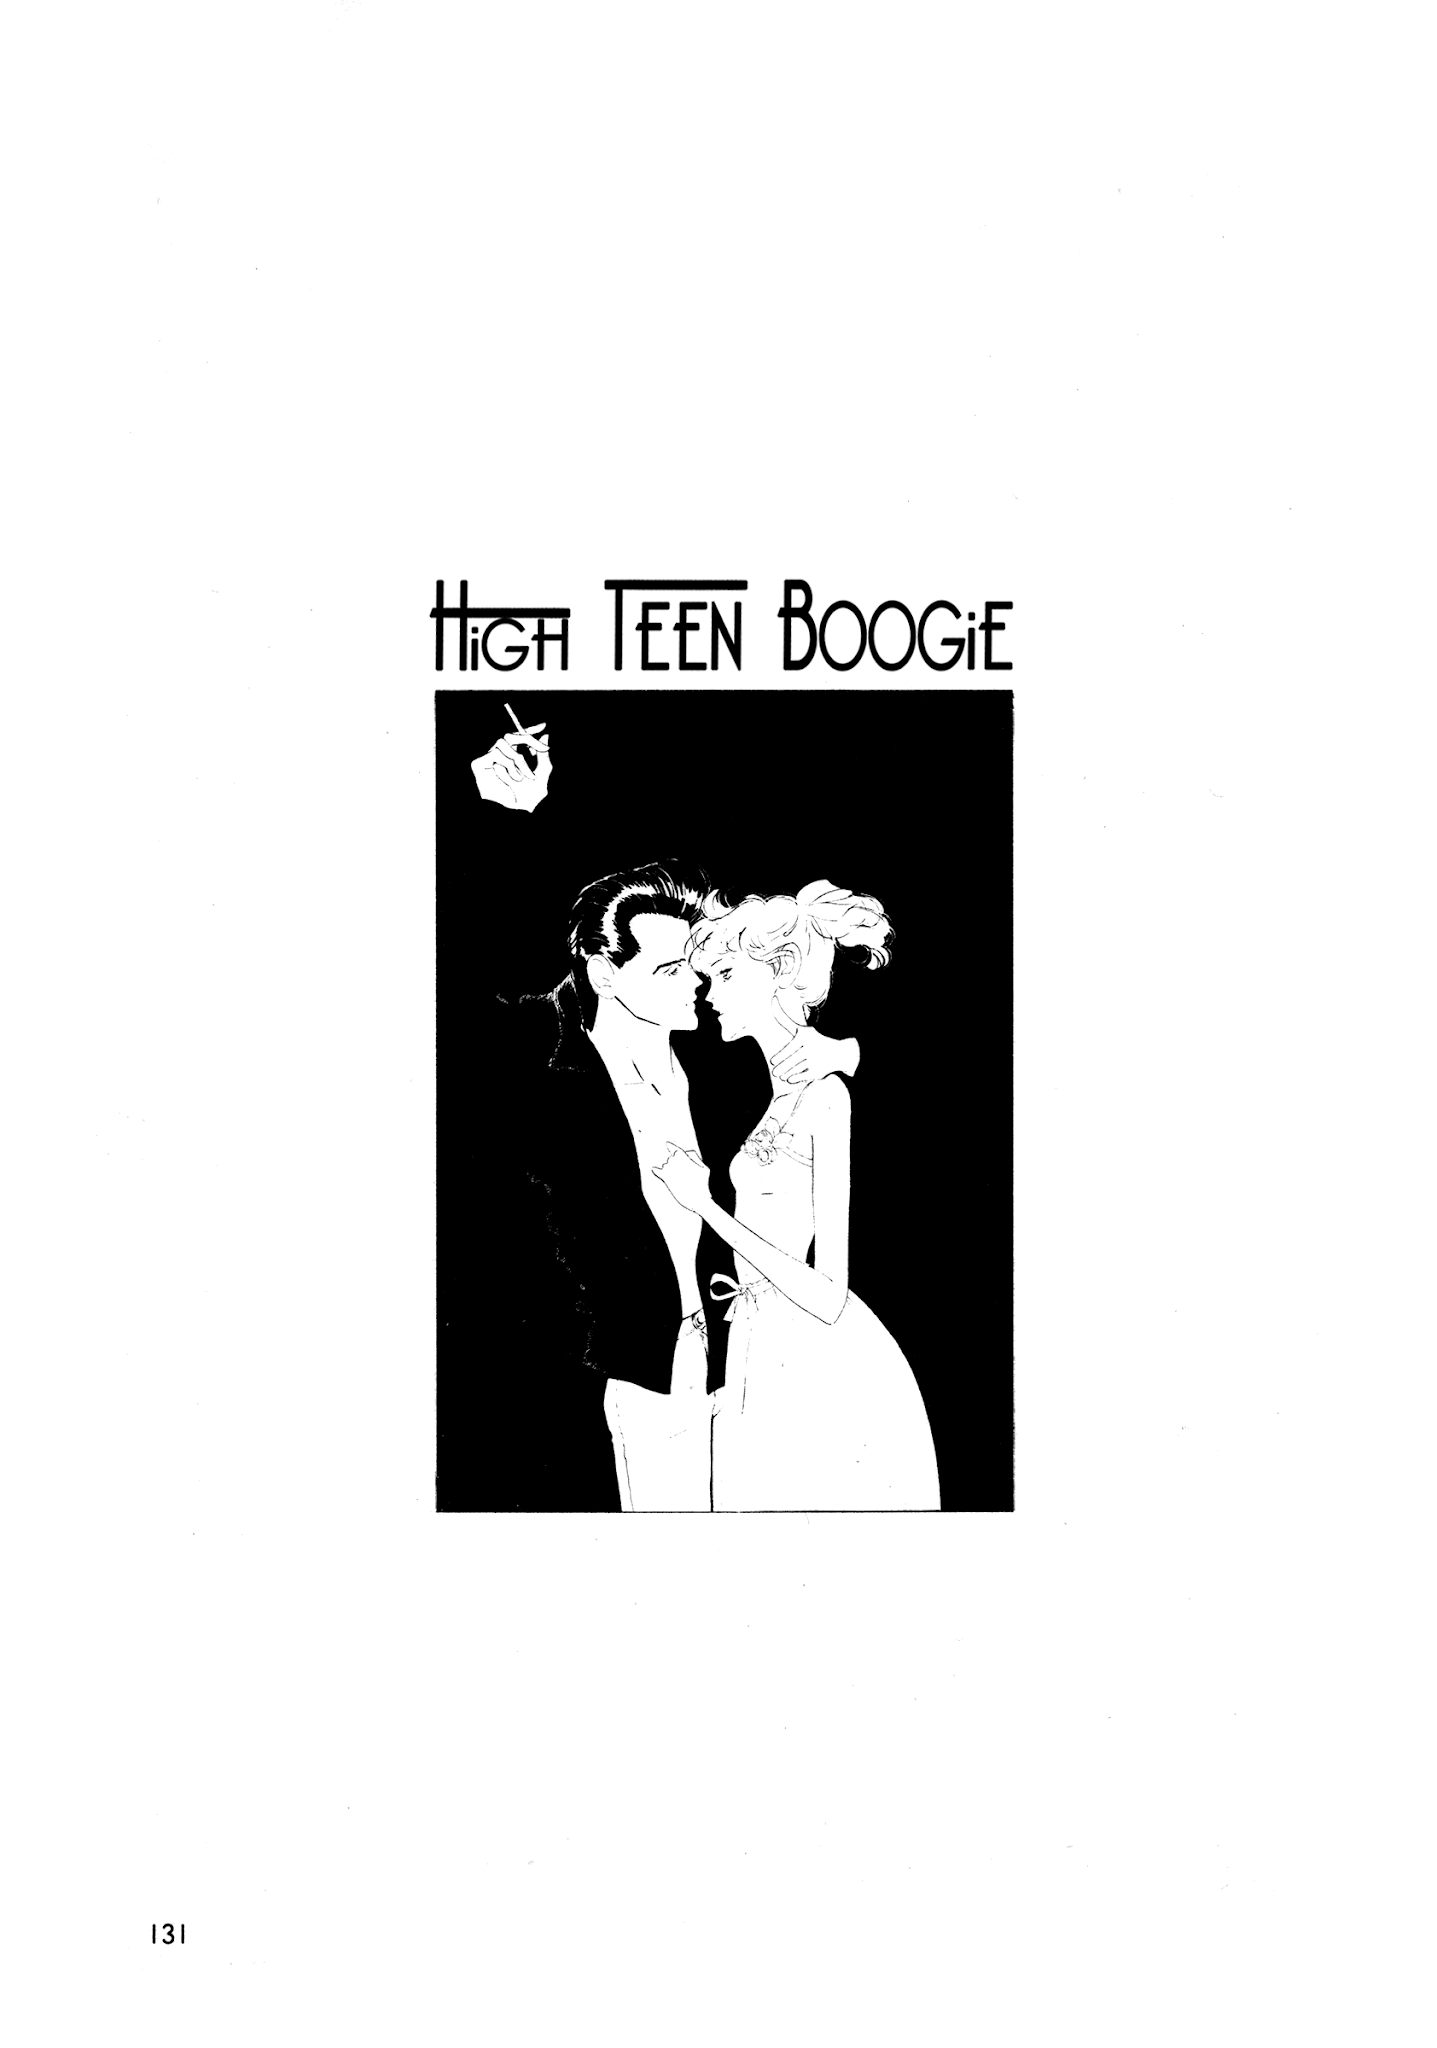 High Teen Boogie - Page 1